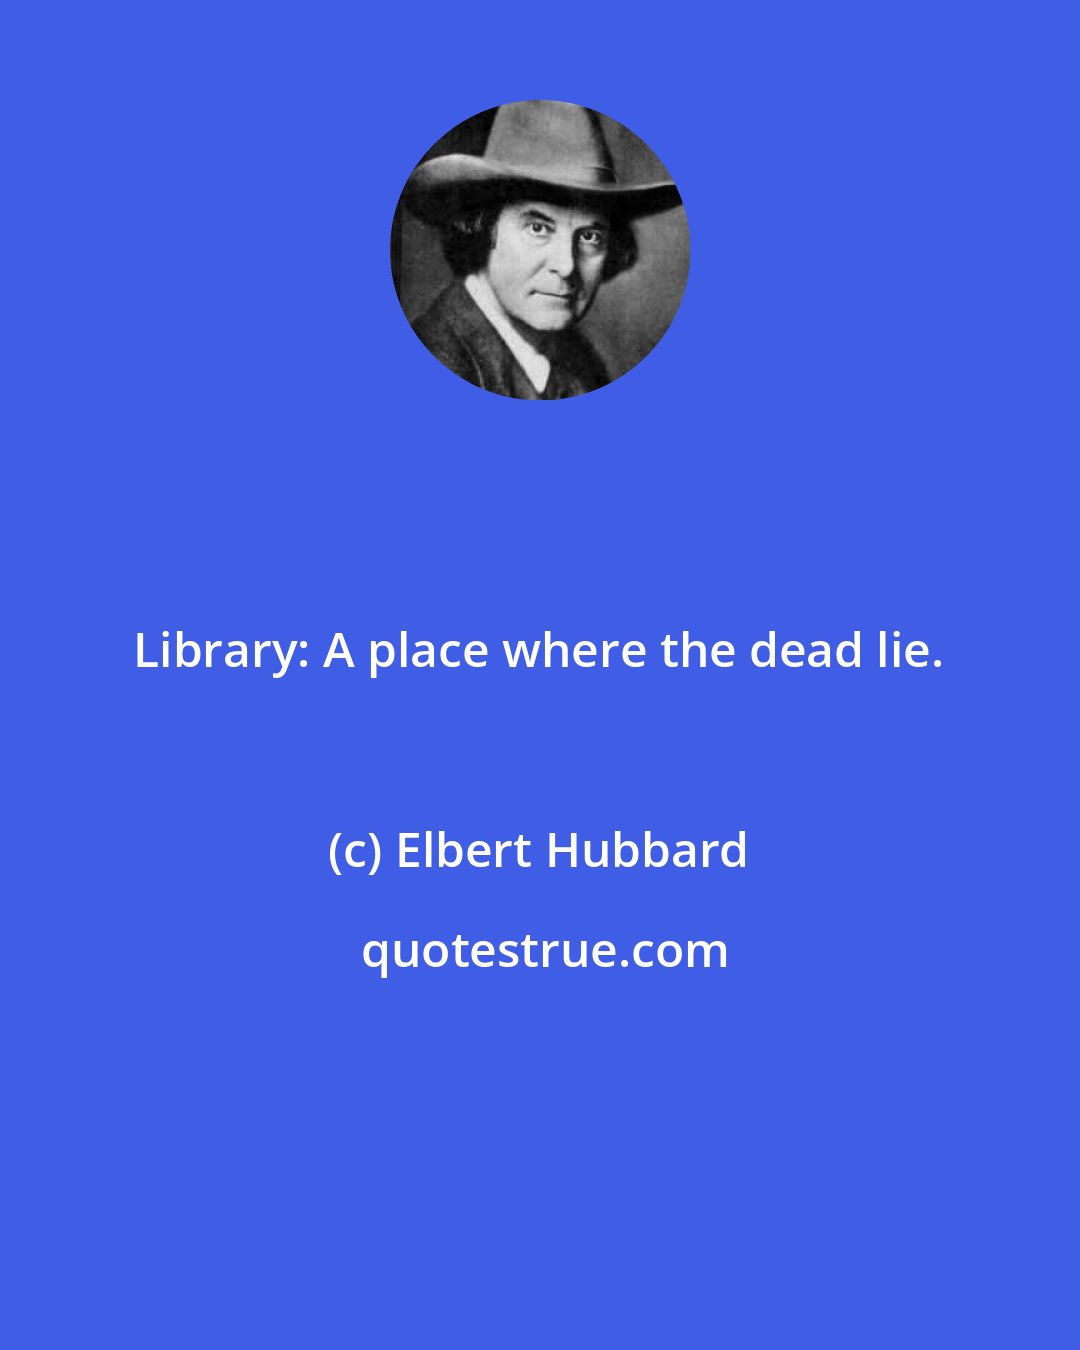 Elbert Hubbard: Library: A place where the dead lie.